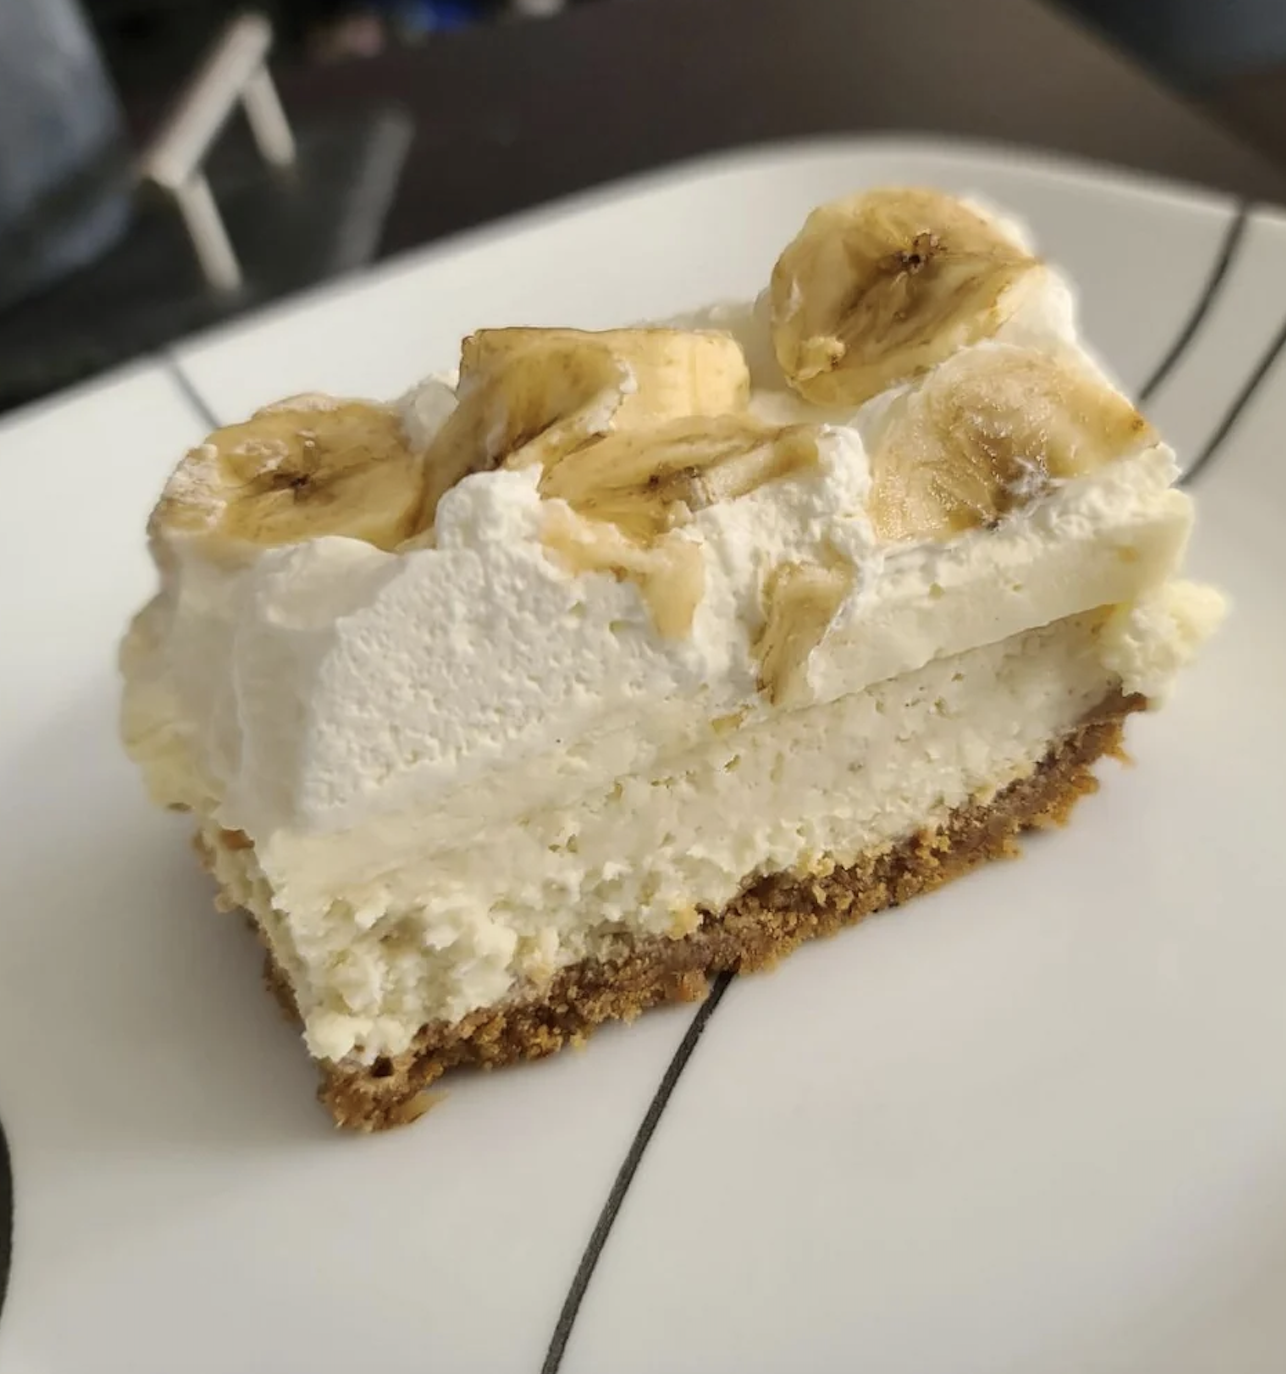 Slice of banana cream pie with fresh banana slices on top, on a white plate